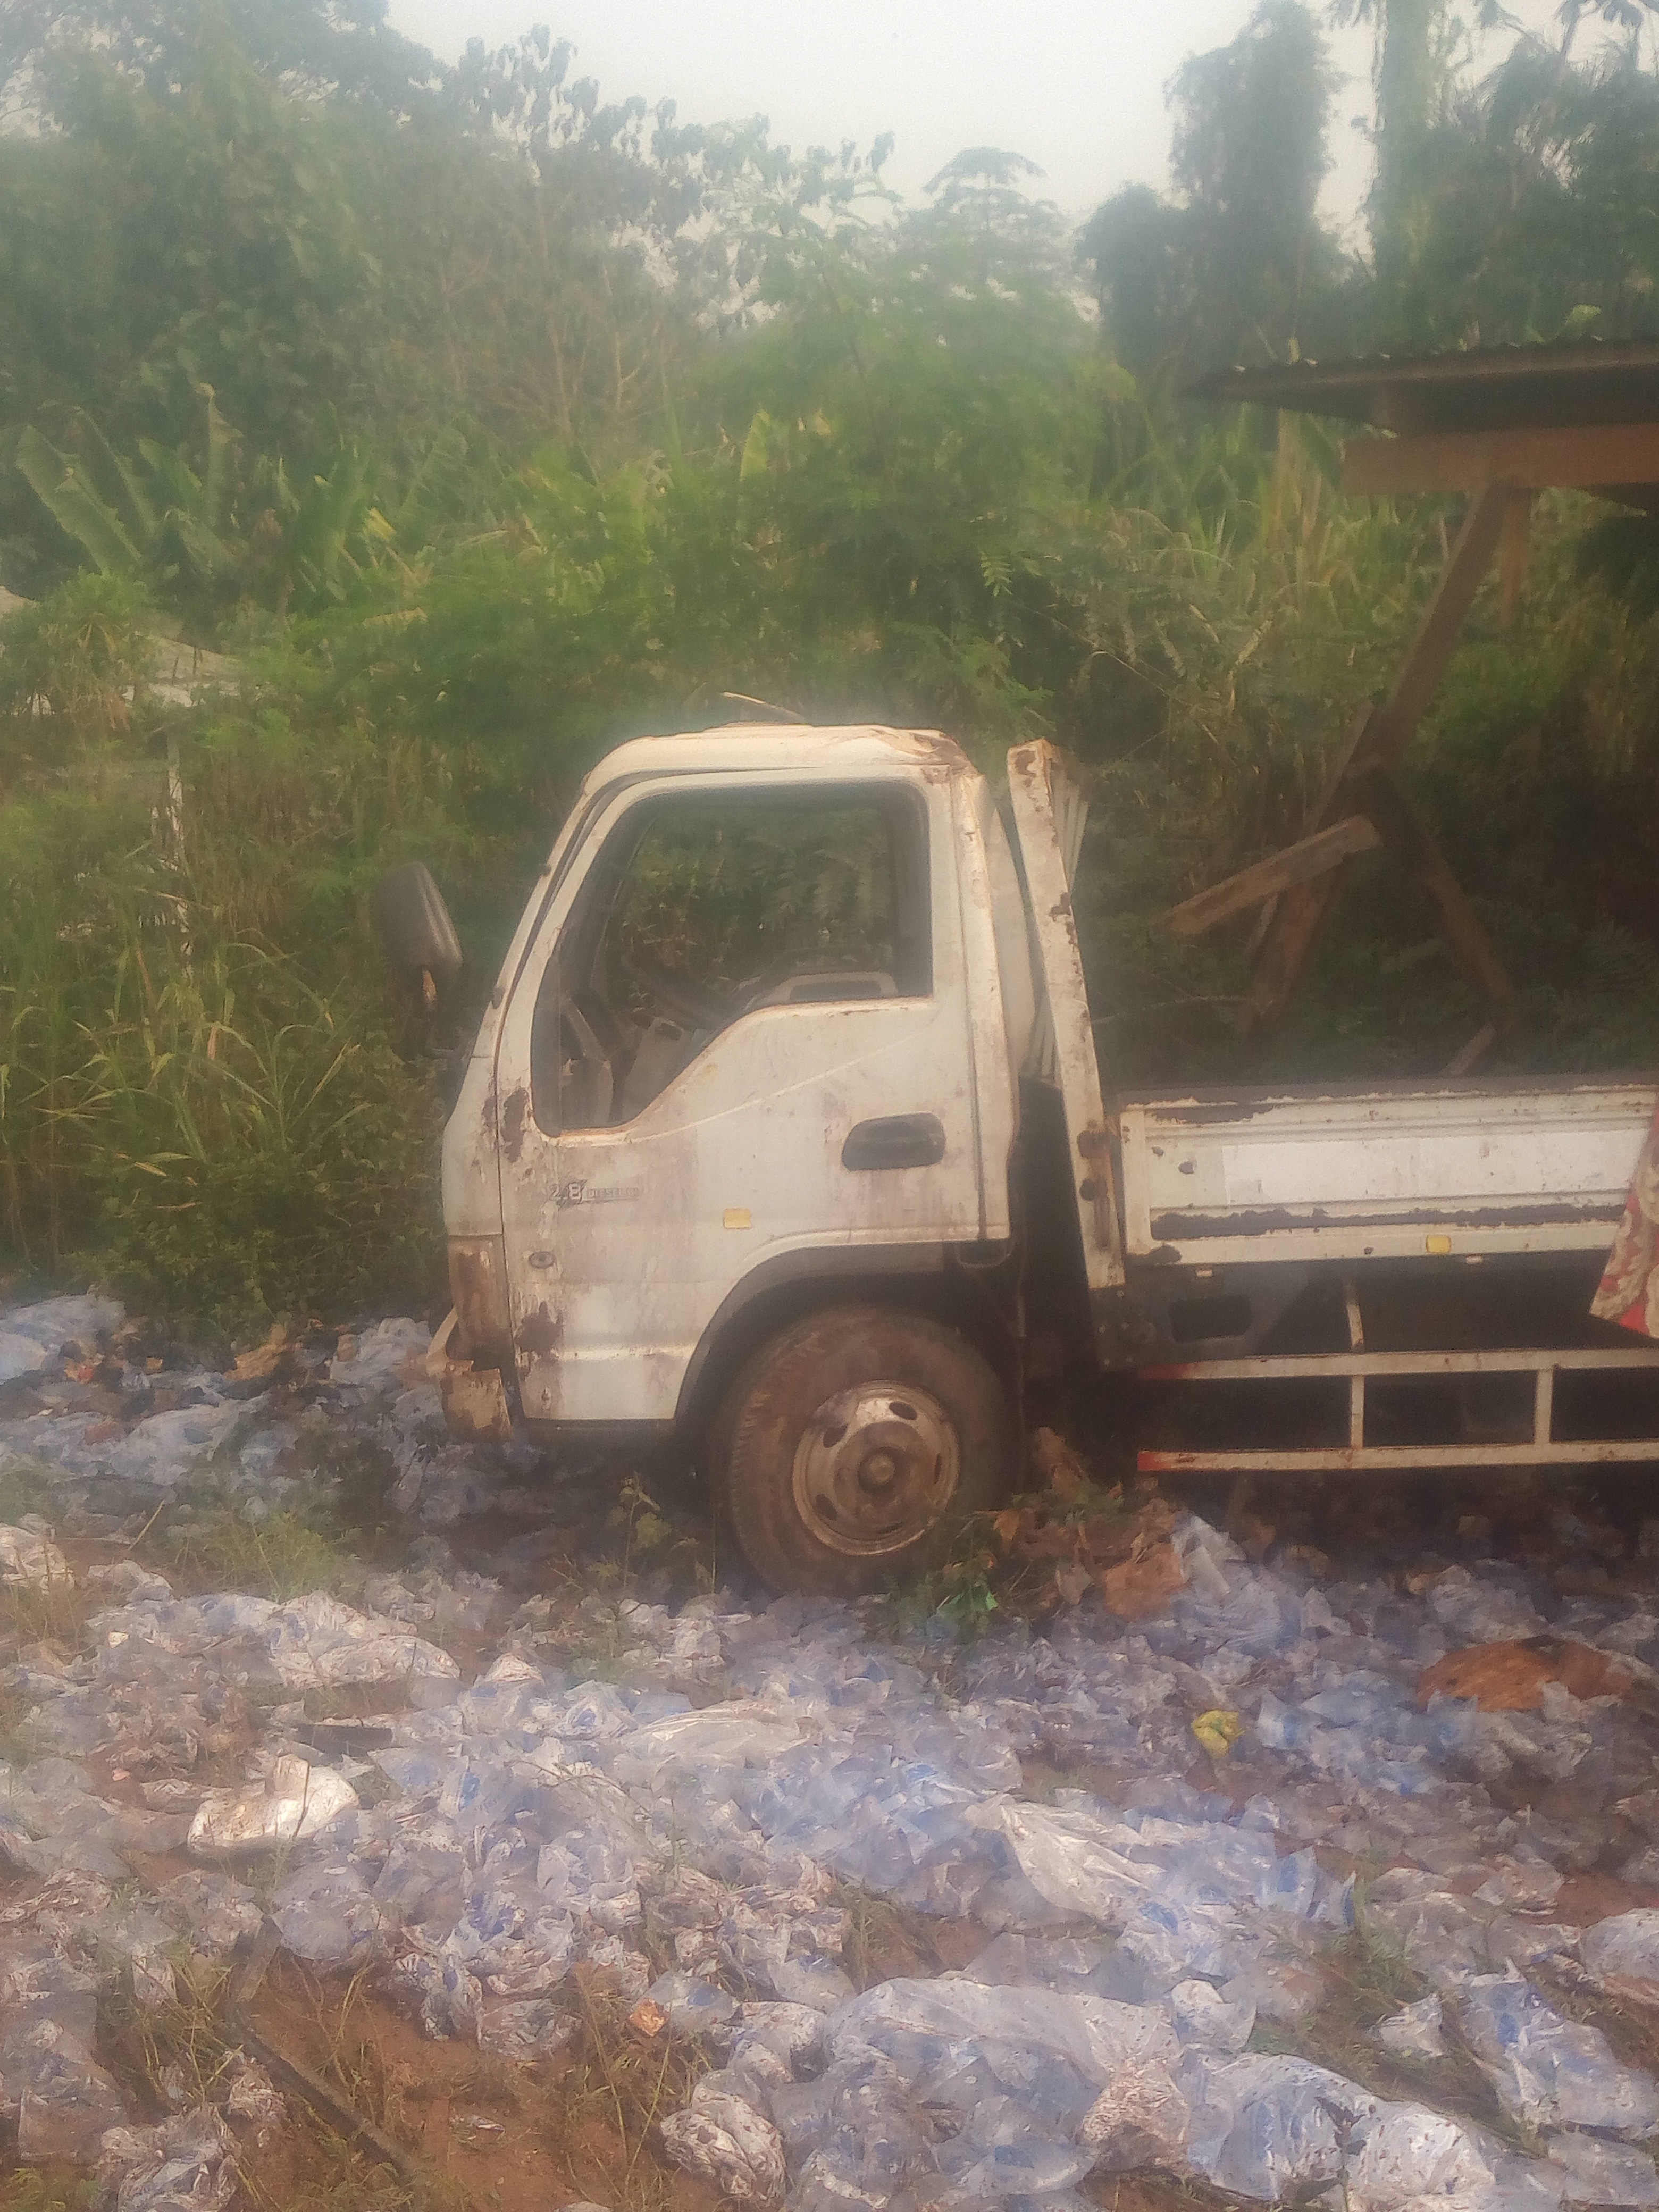 Water Company’s Truck involved in accident in Kukuom